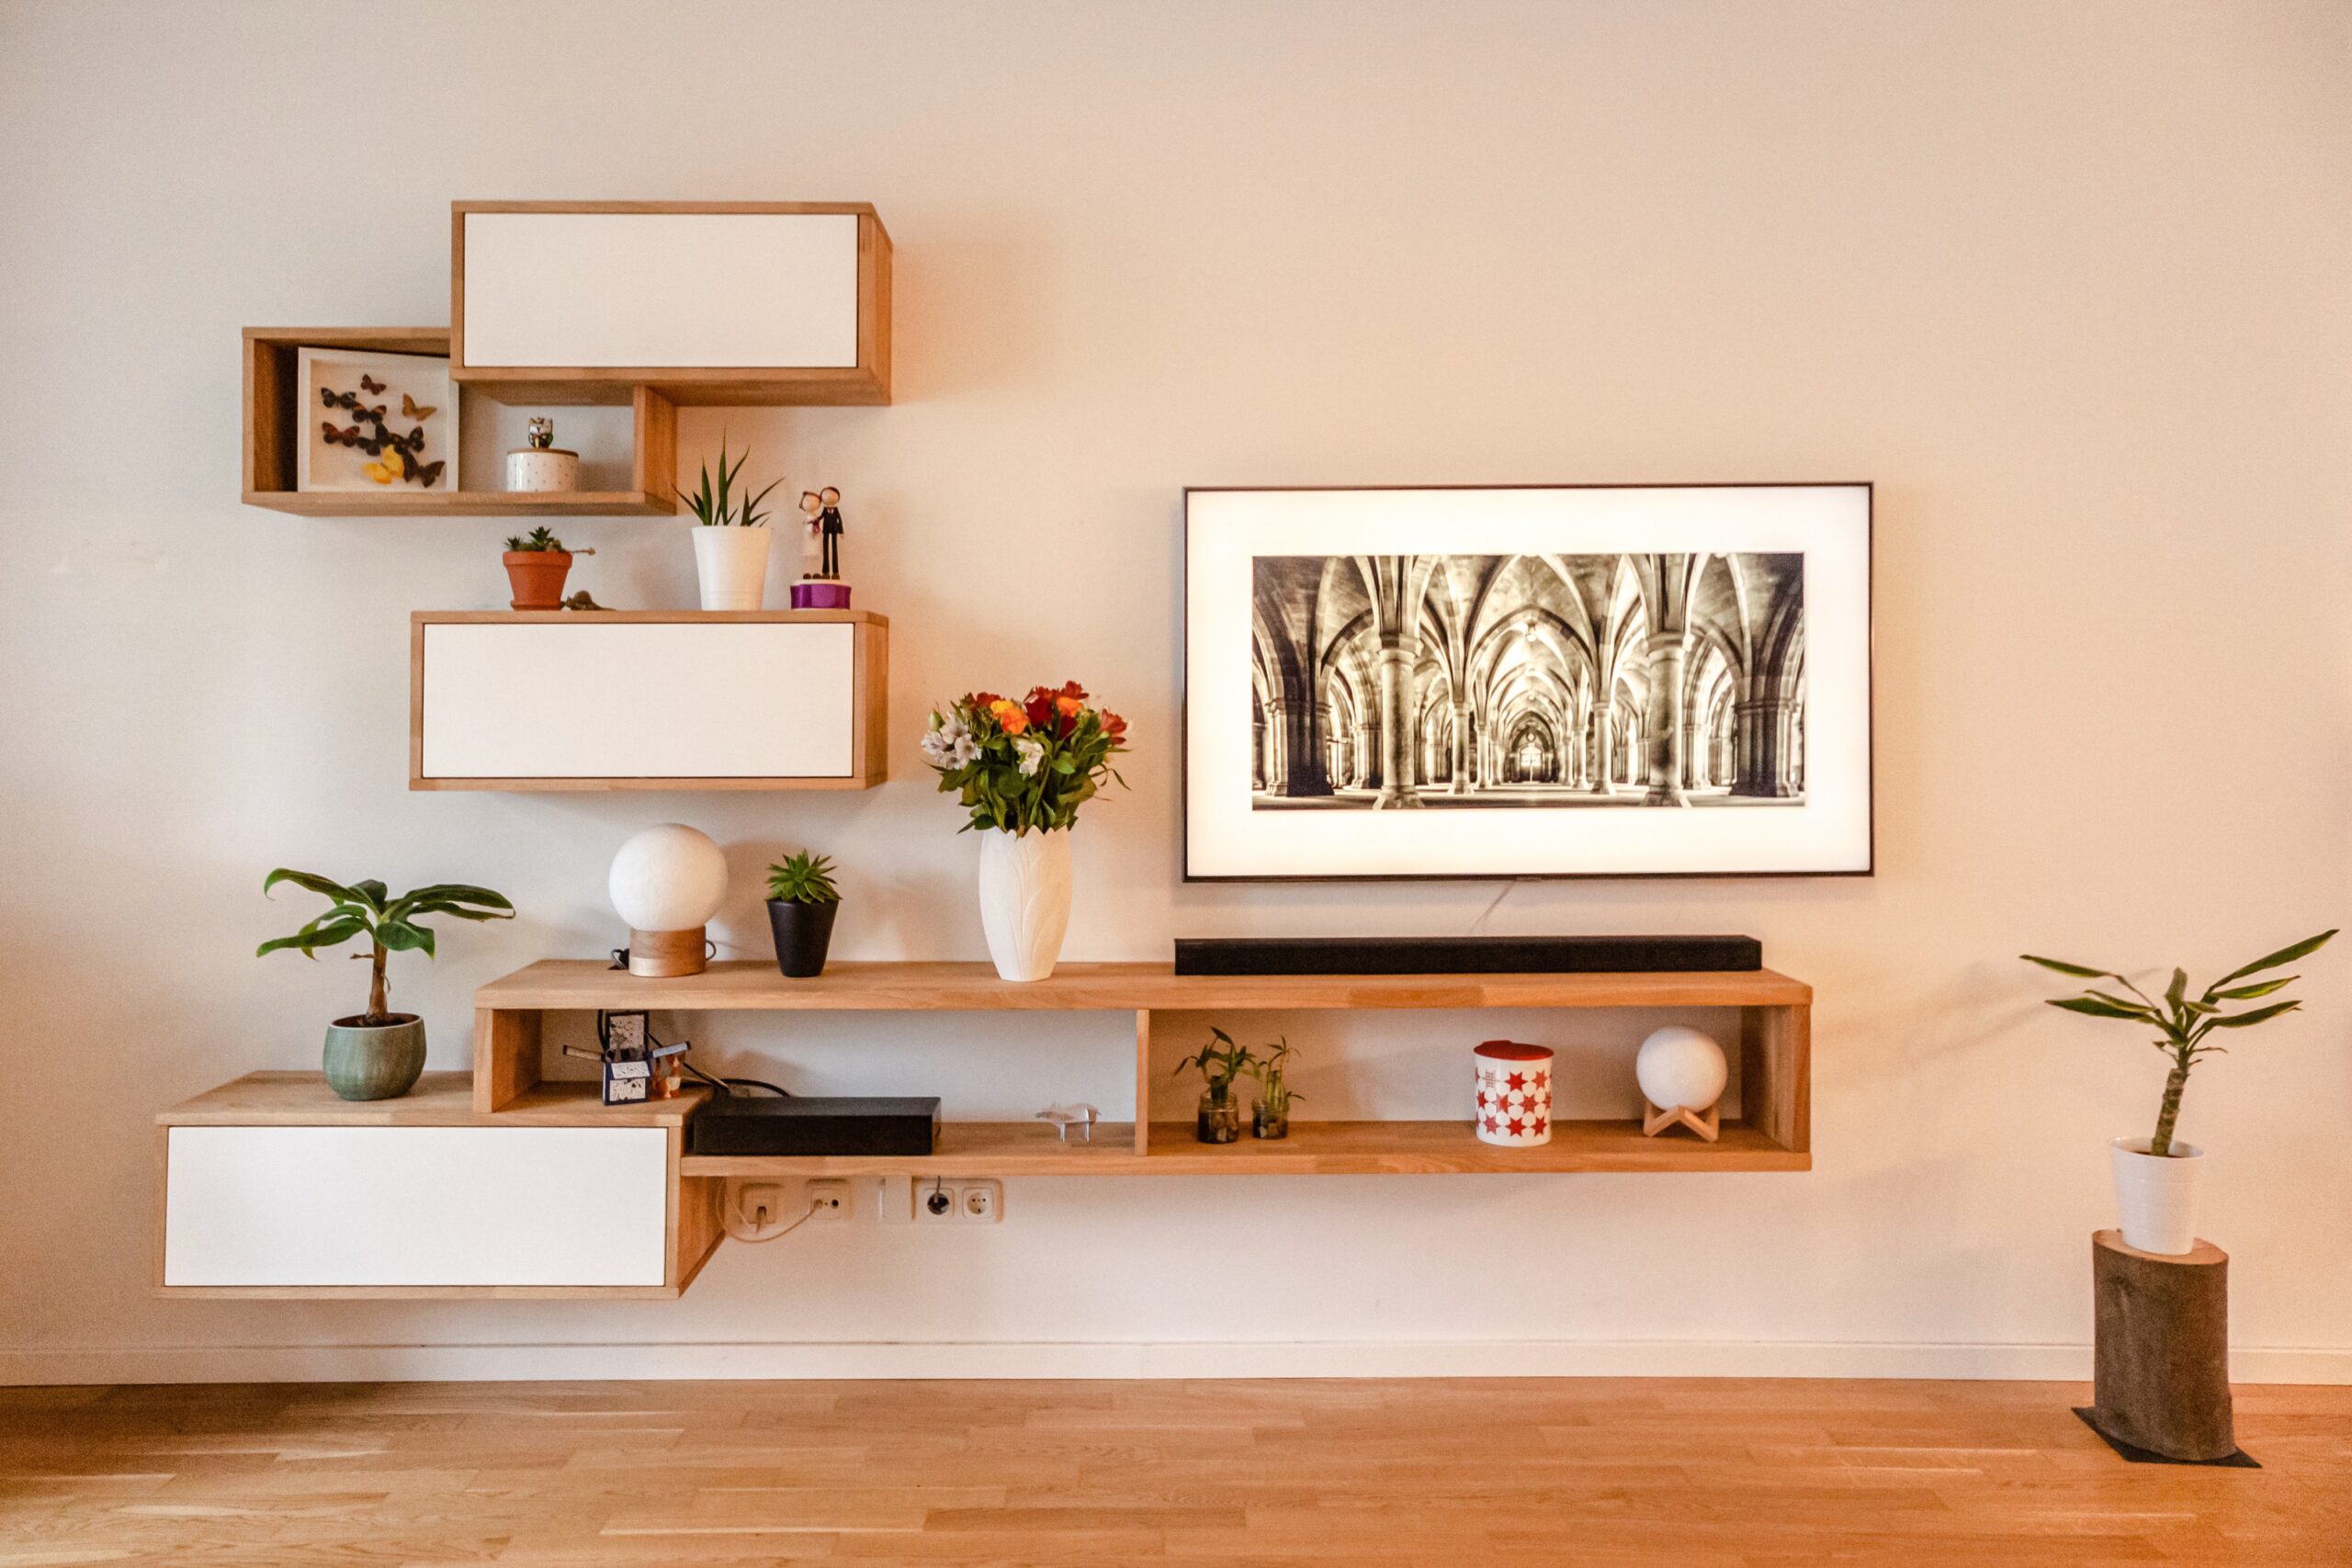 Utilize wood shelving, tables, decor and furniture to combine a boho style and organic modern design in your home. Pictured: Wood shelving with decor.